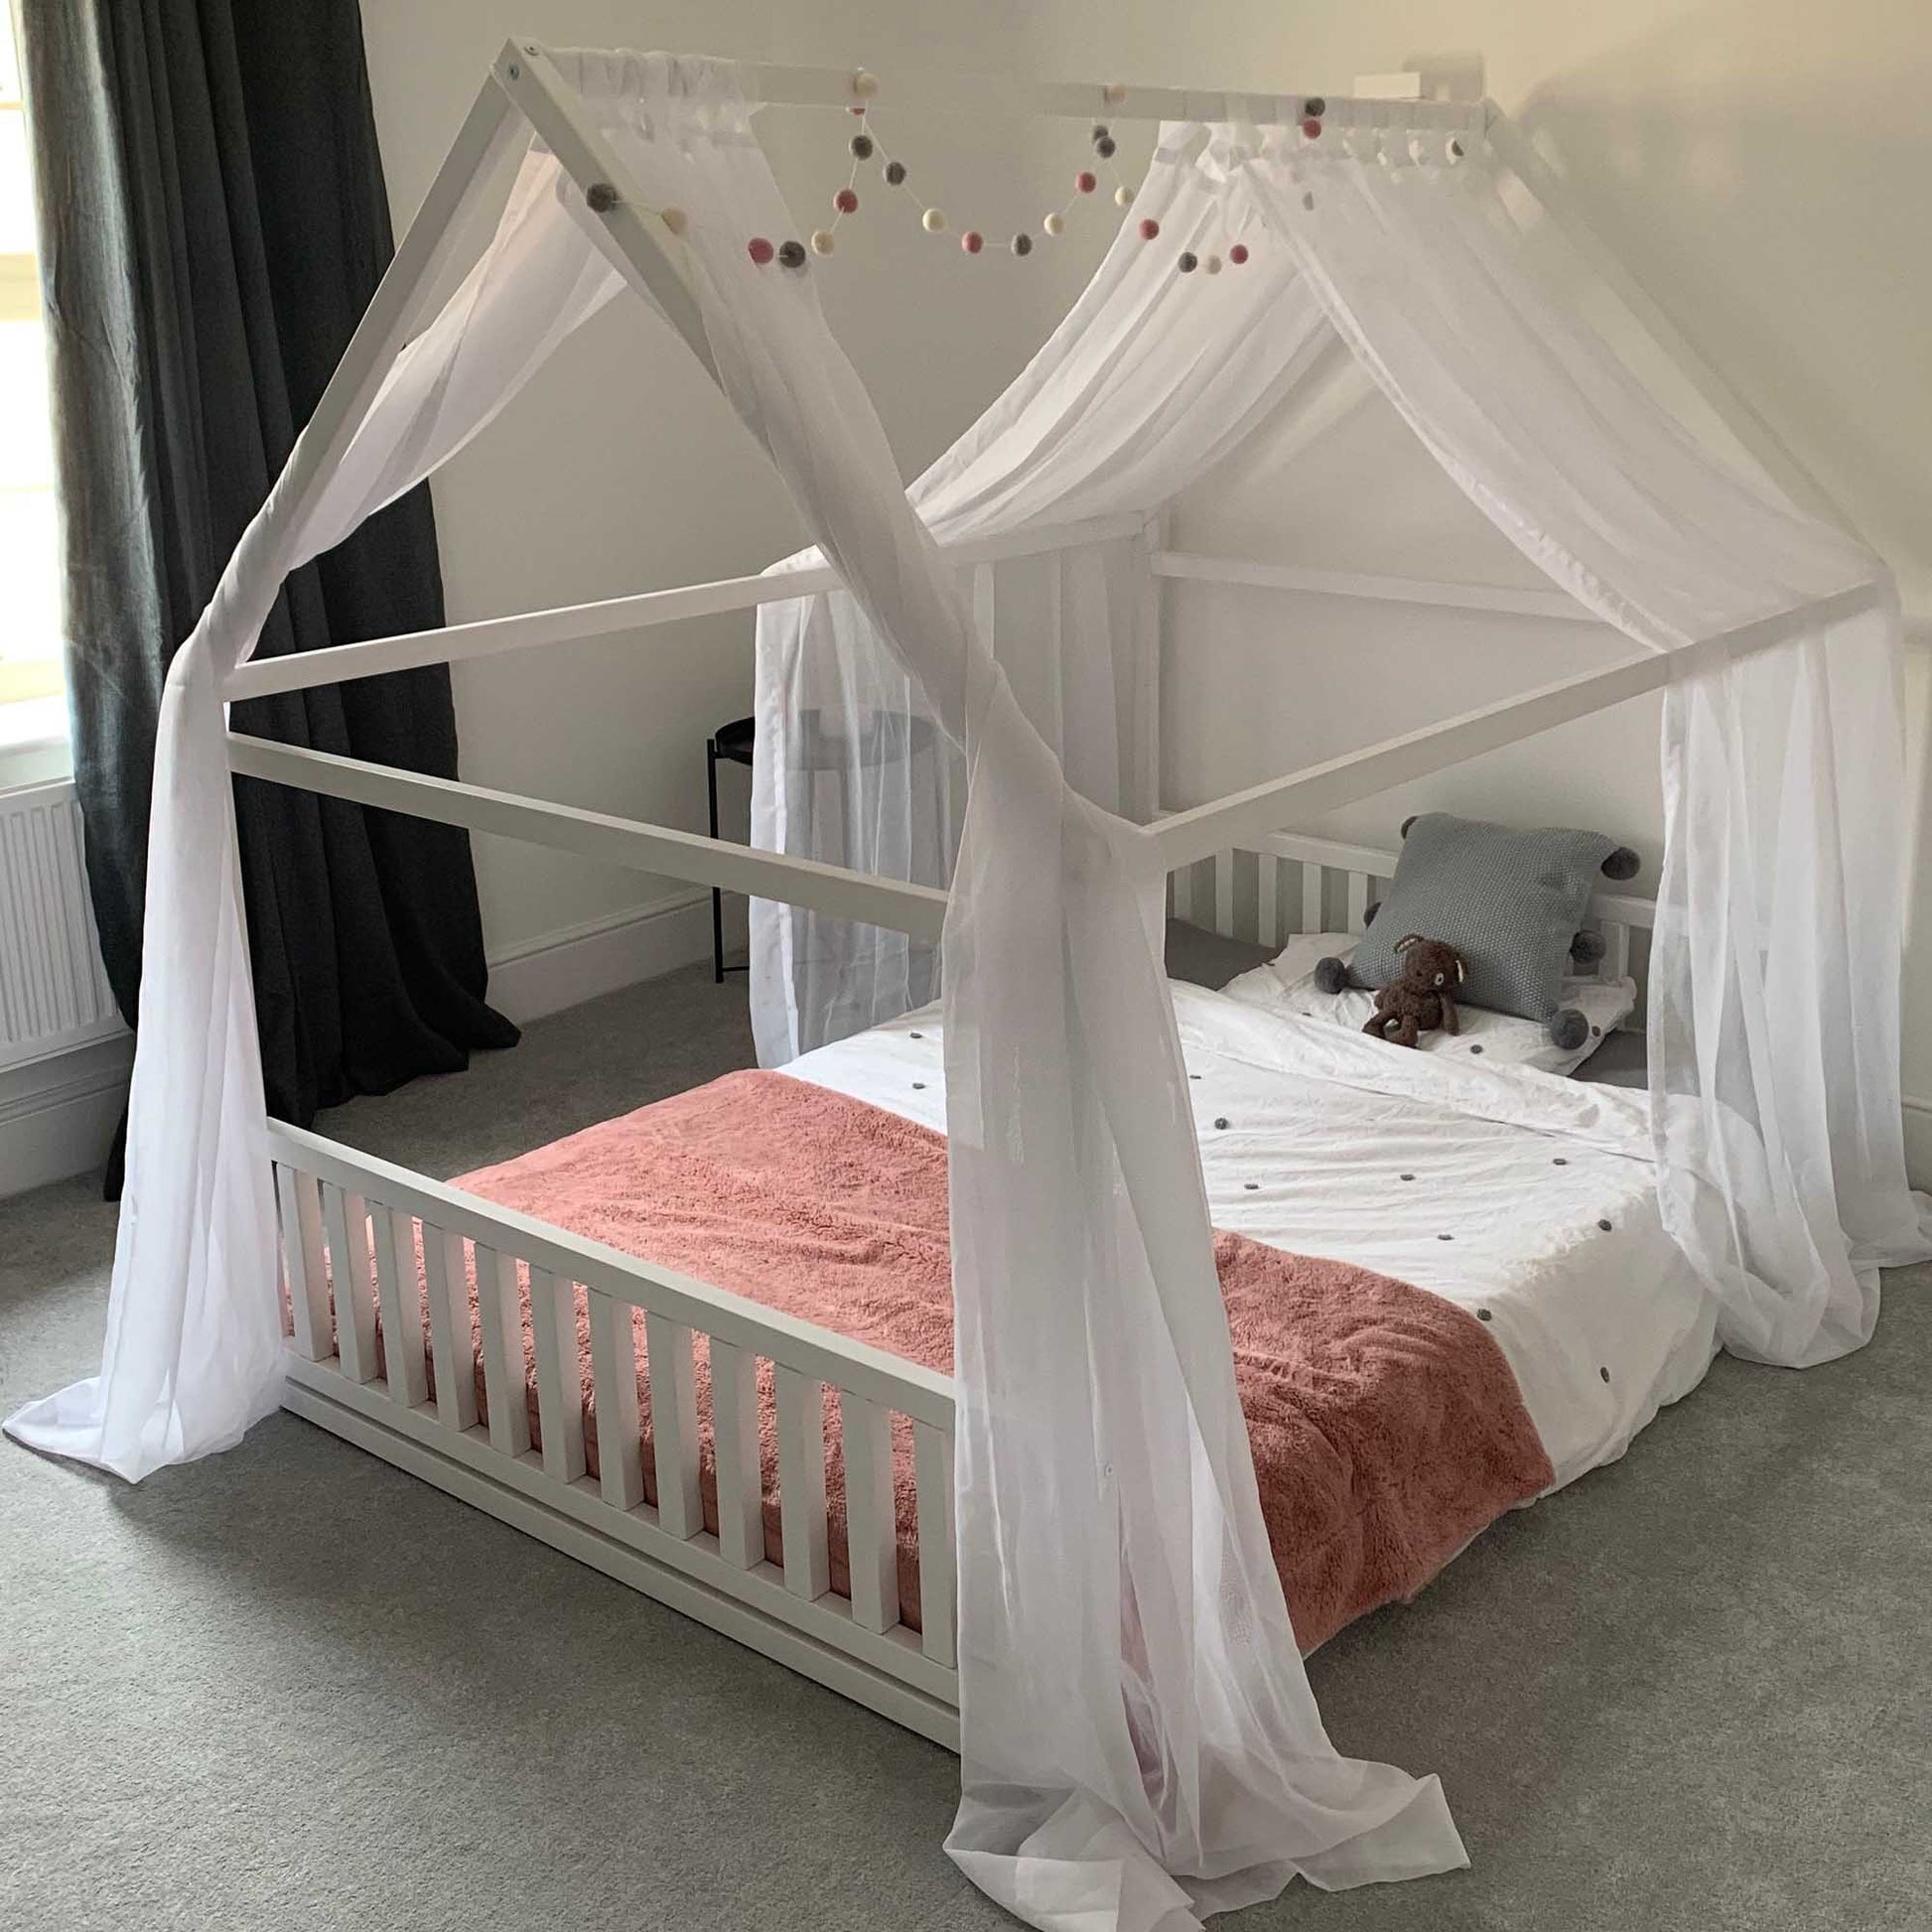 A Sweet Home From Wood Toddler house bed with a headboard and footboard that creates a sleep haven in the form of a house bed.